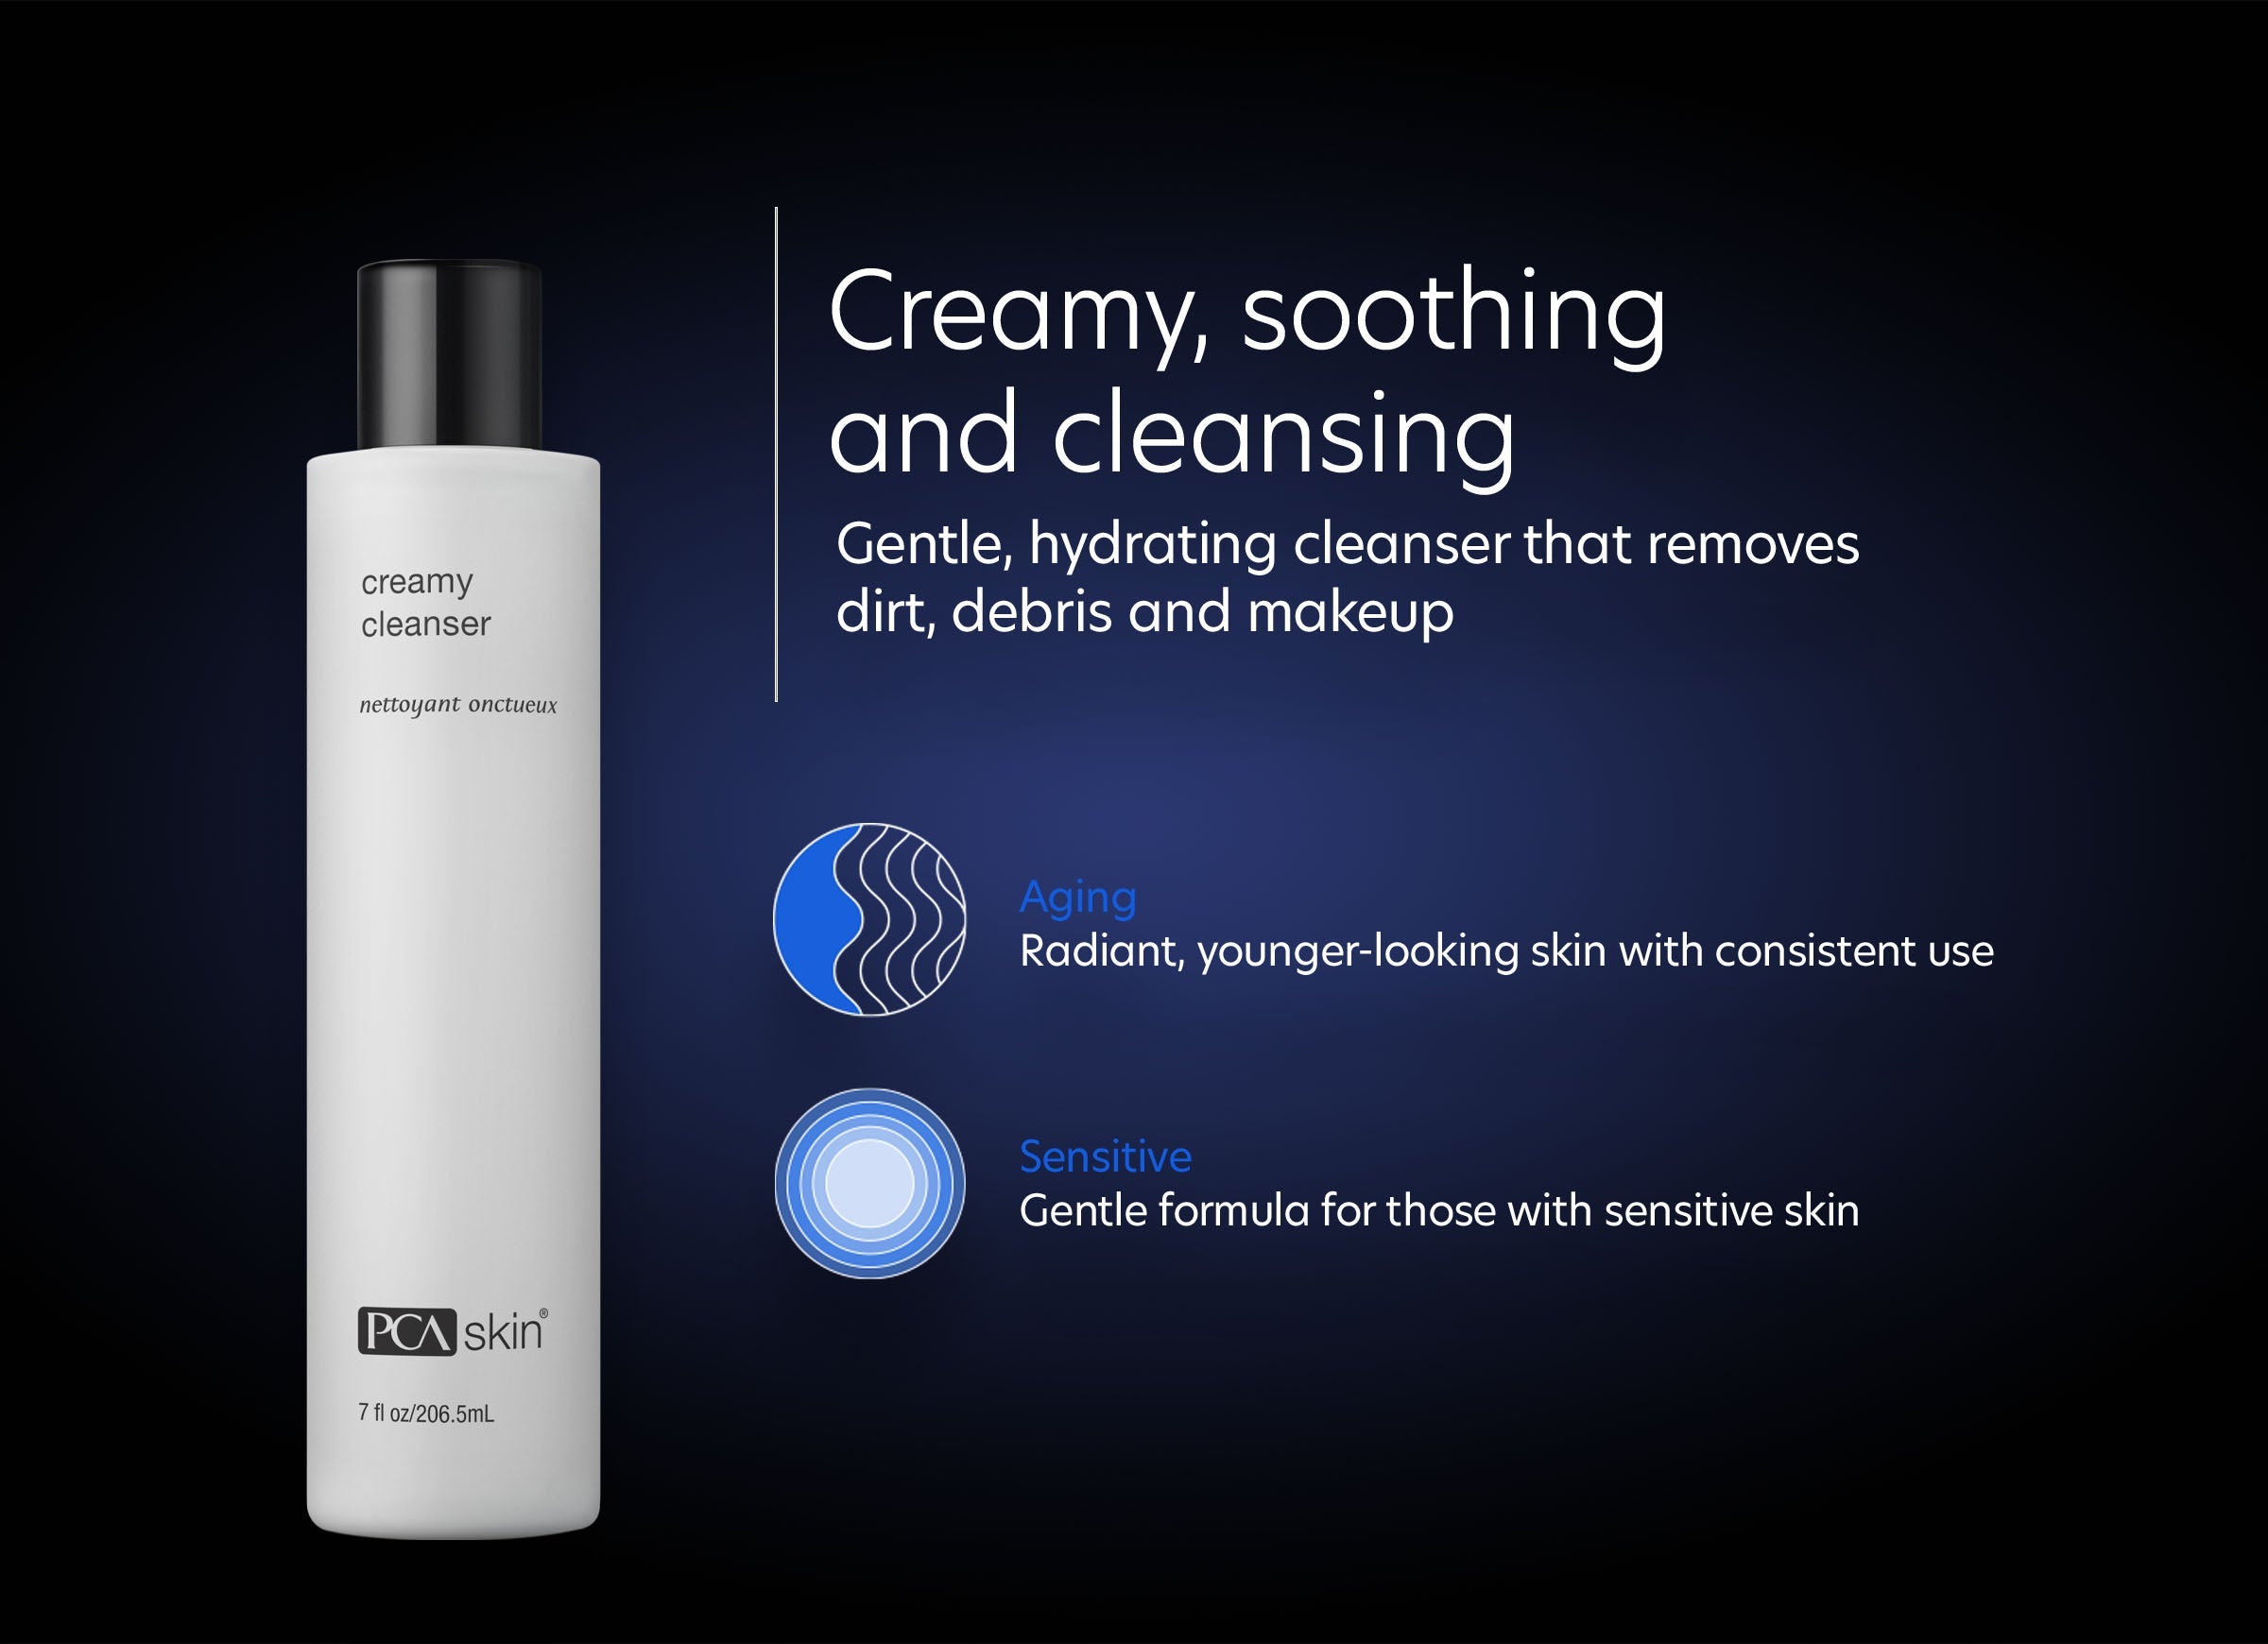 Creamy Cleanser - Creamy, Soothing and cleansing. Gentle, hydrating cleanser that removes dirt, debris and makeup.